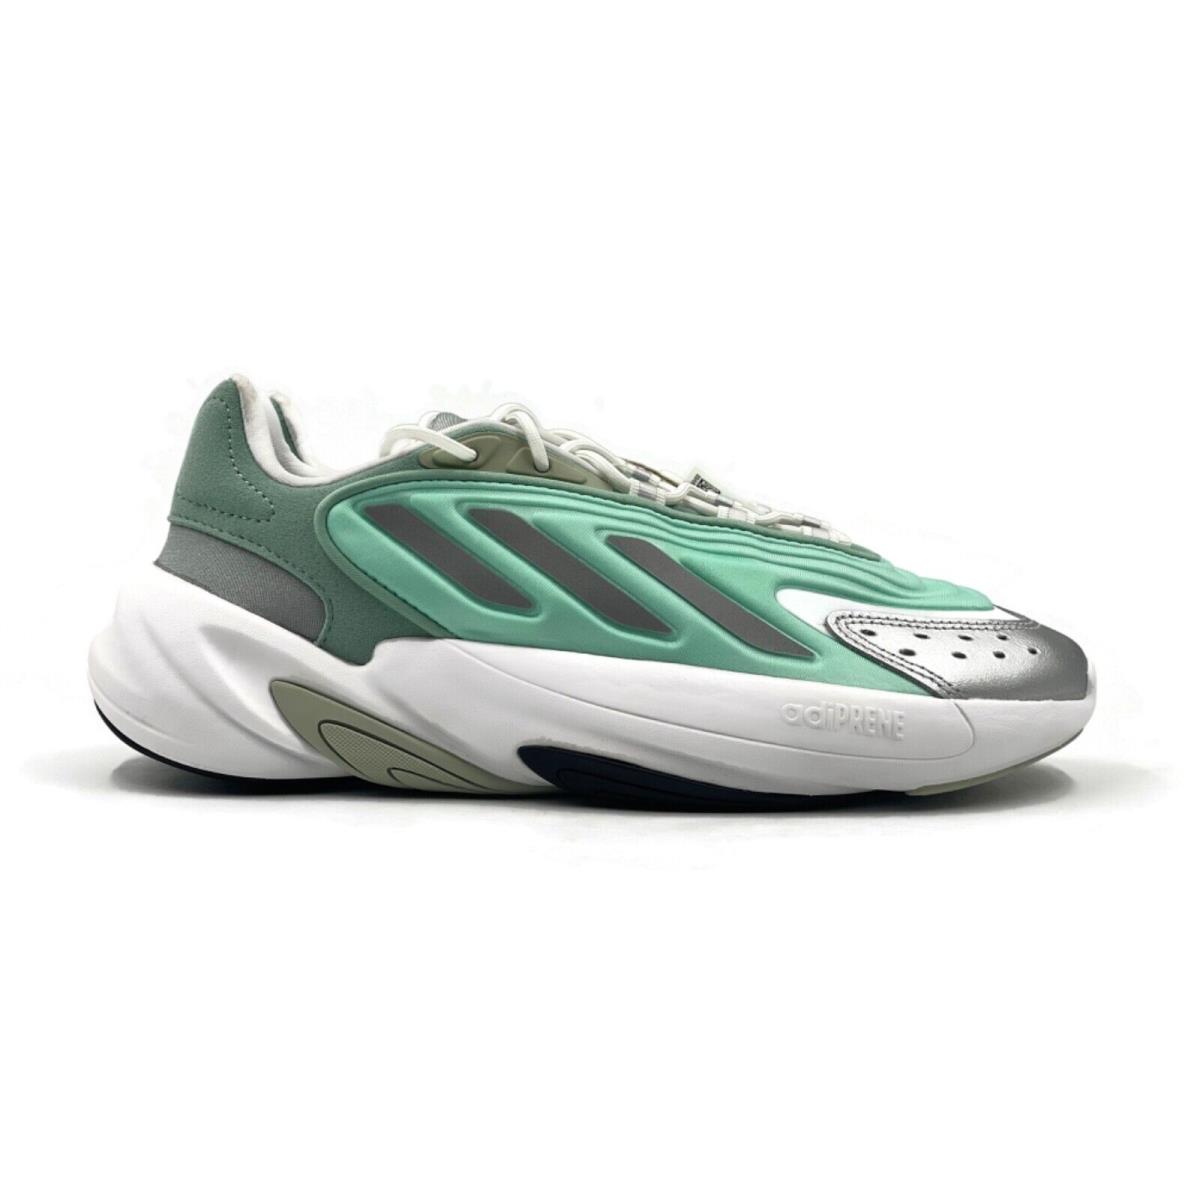 Adidas Ozelia Womens Casual Lifestyle Shoe Green White Athletic Trainer Sneaker